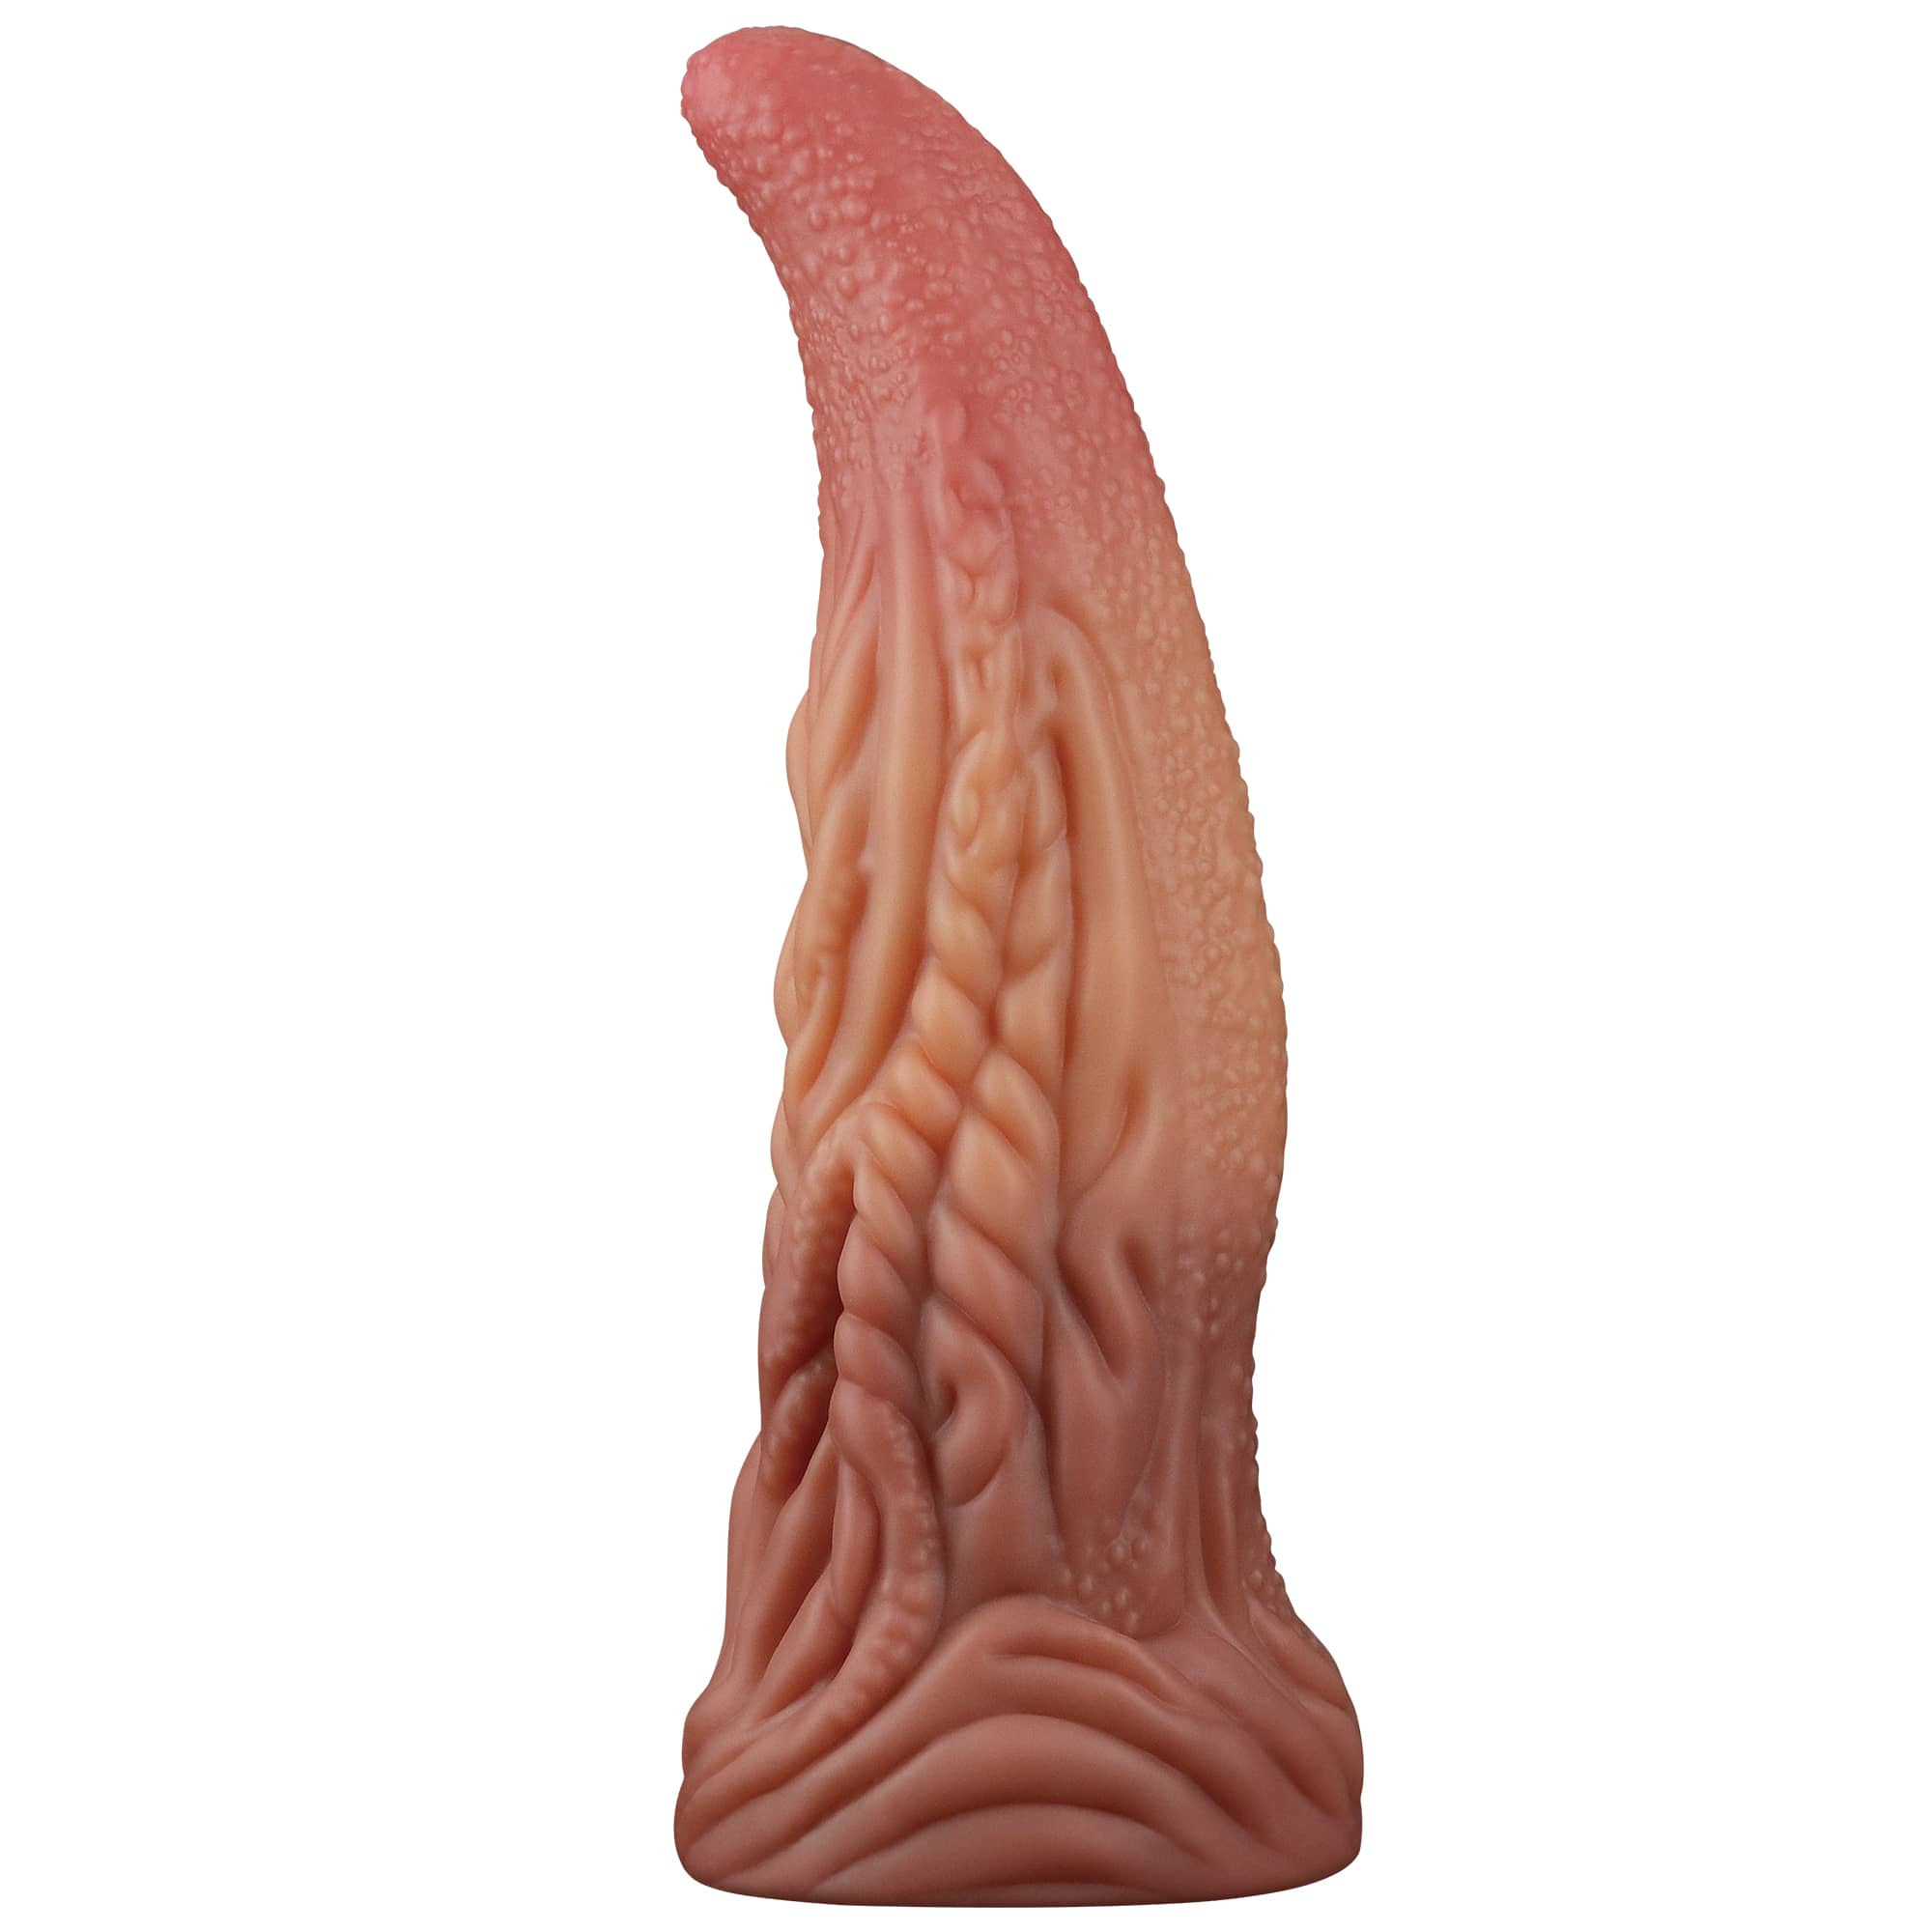 The 10 inches alien tentacle silicone dildo is upright